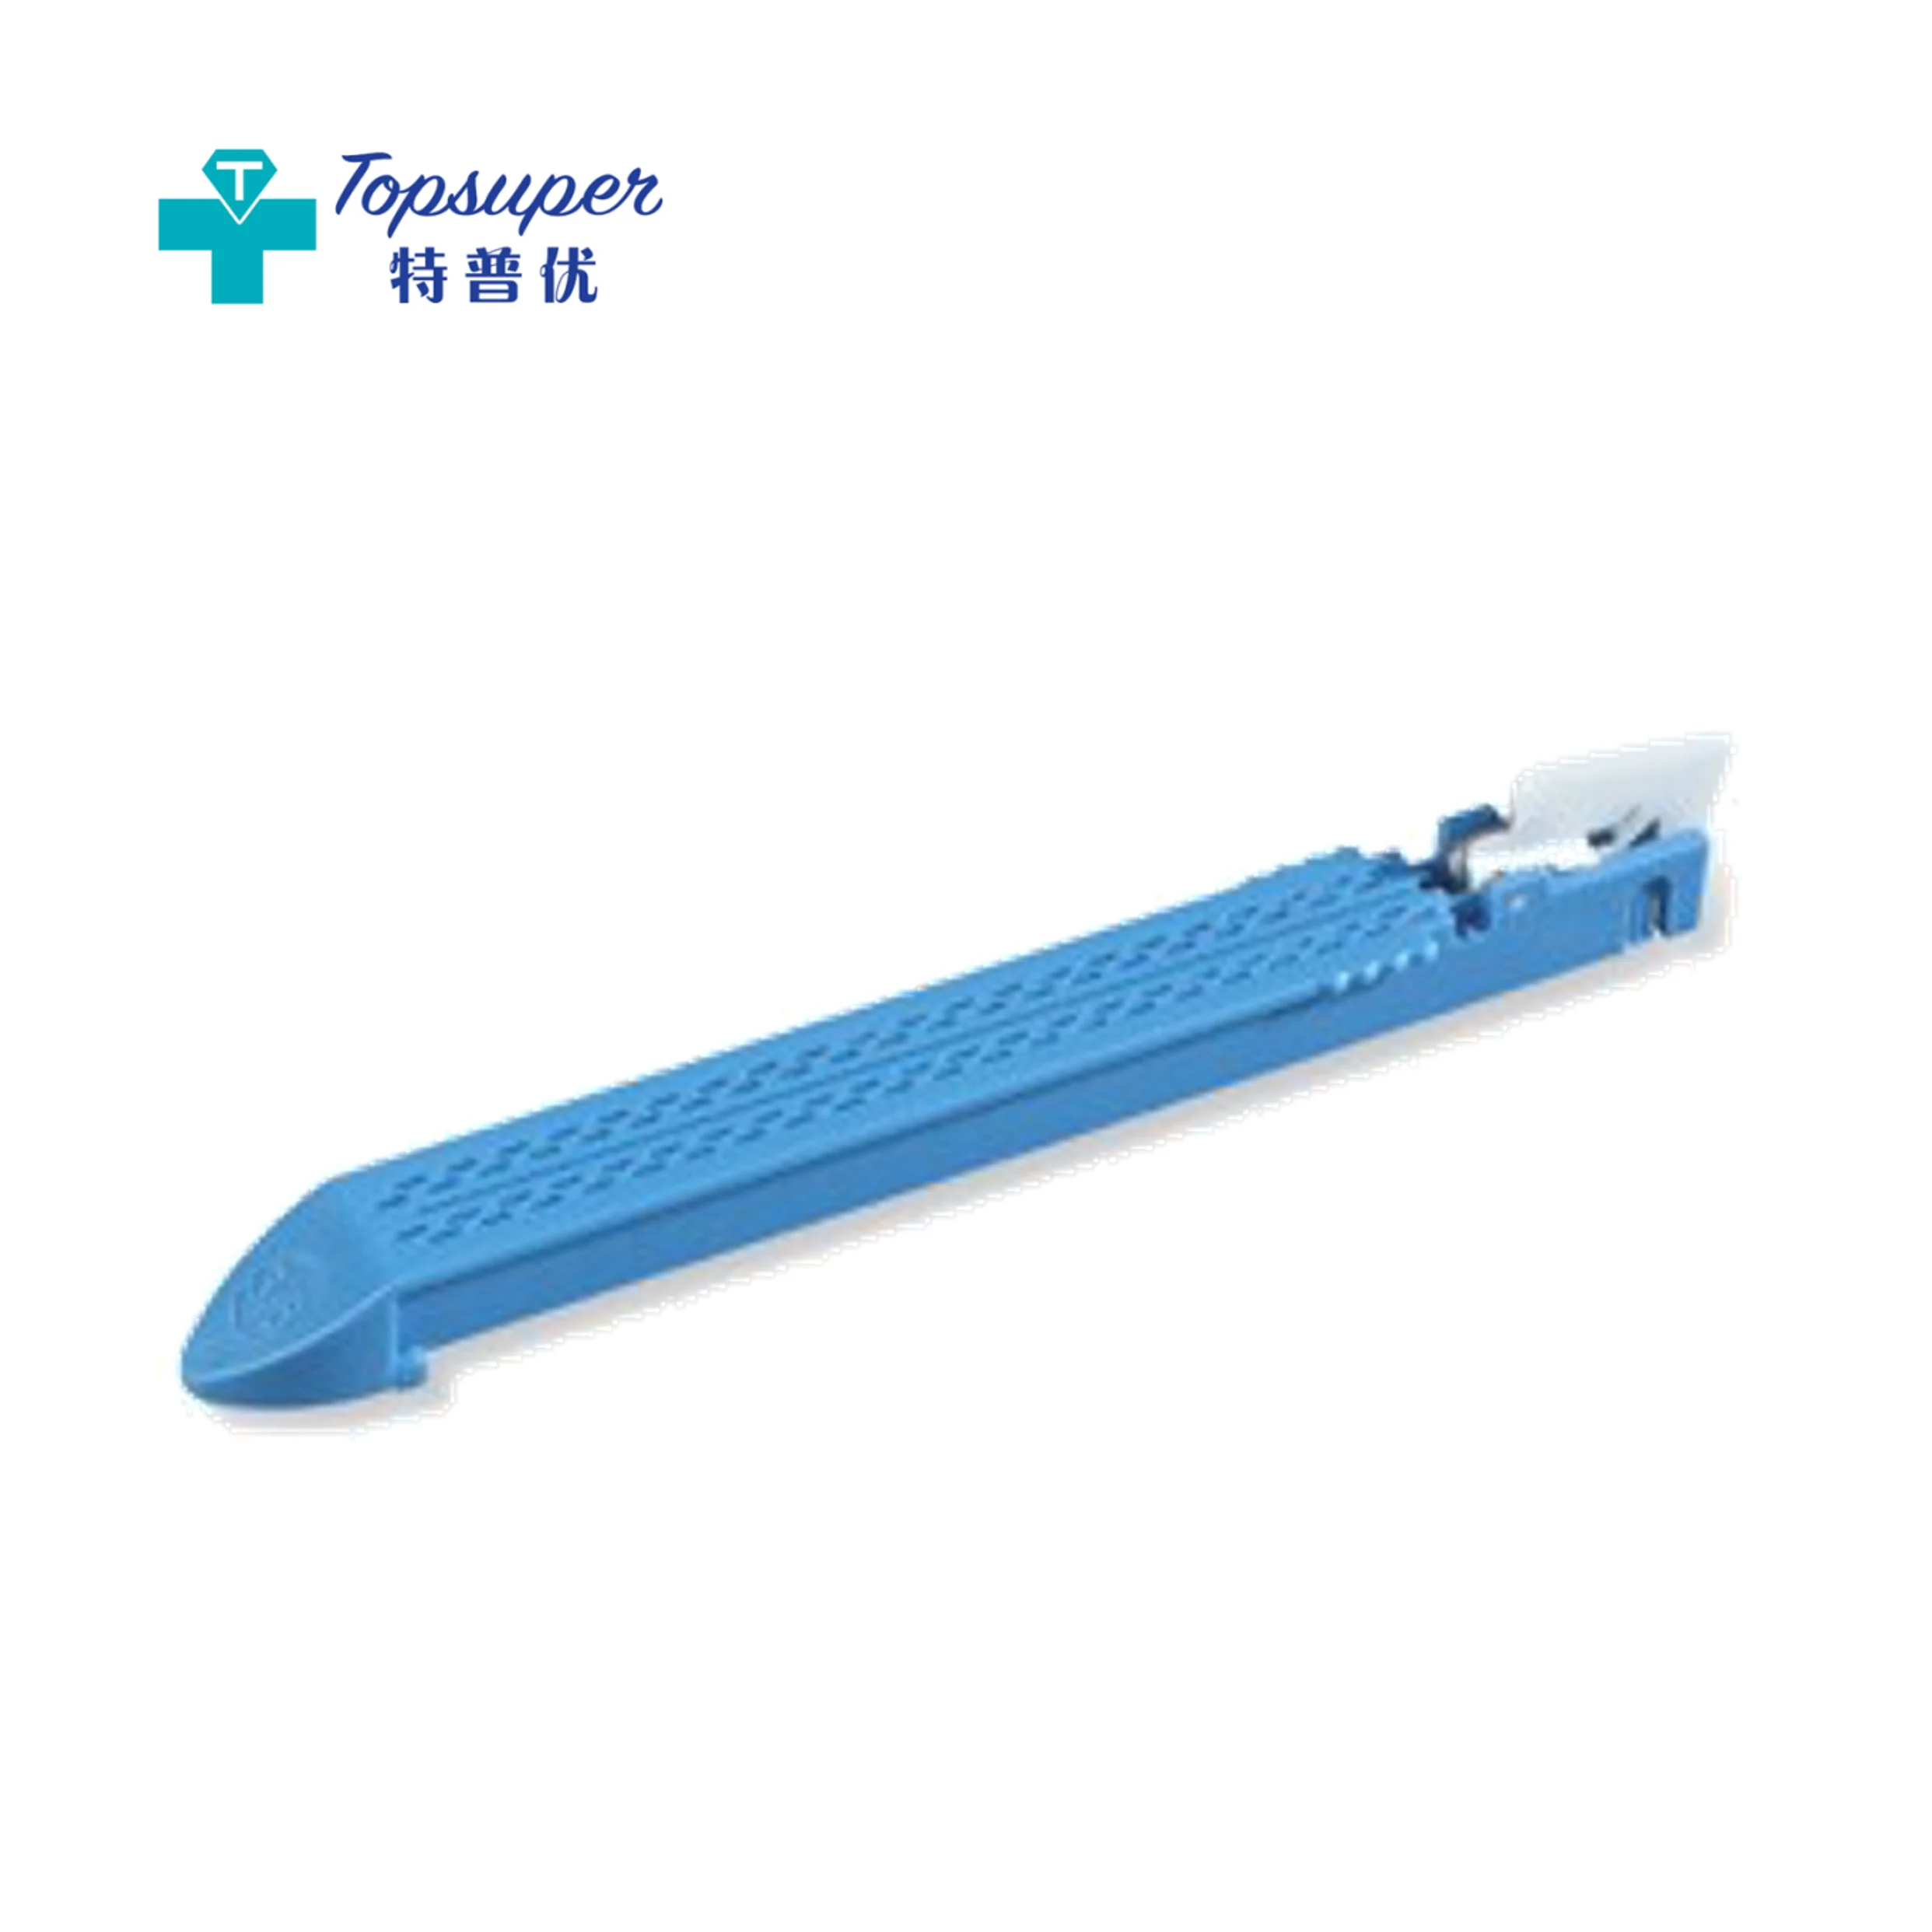 Topsuper Medical Instrument Gia Stapler Disposable Rotate Linear Cutter Staplers For Endoscope Use Stapling